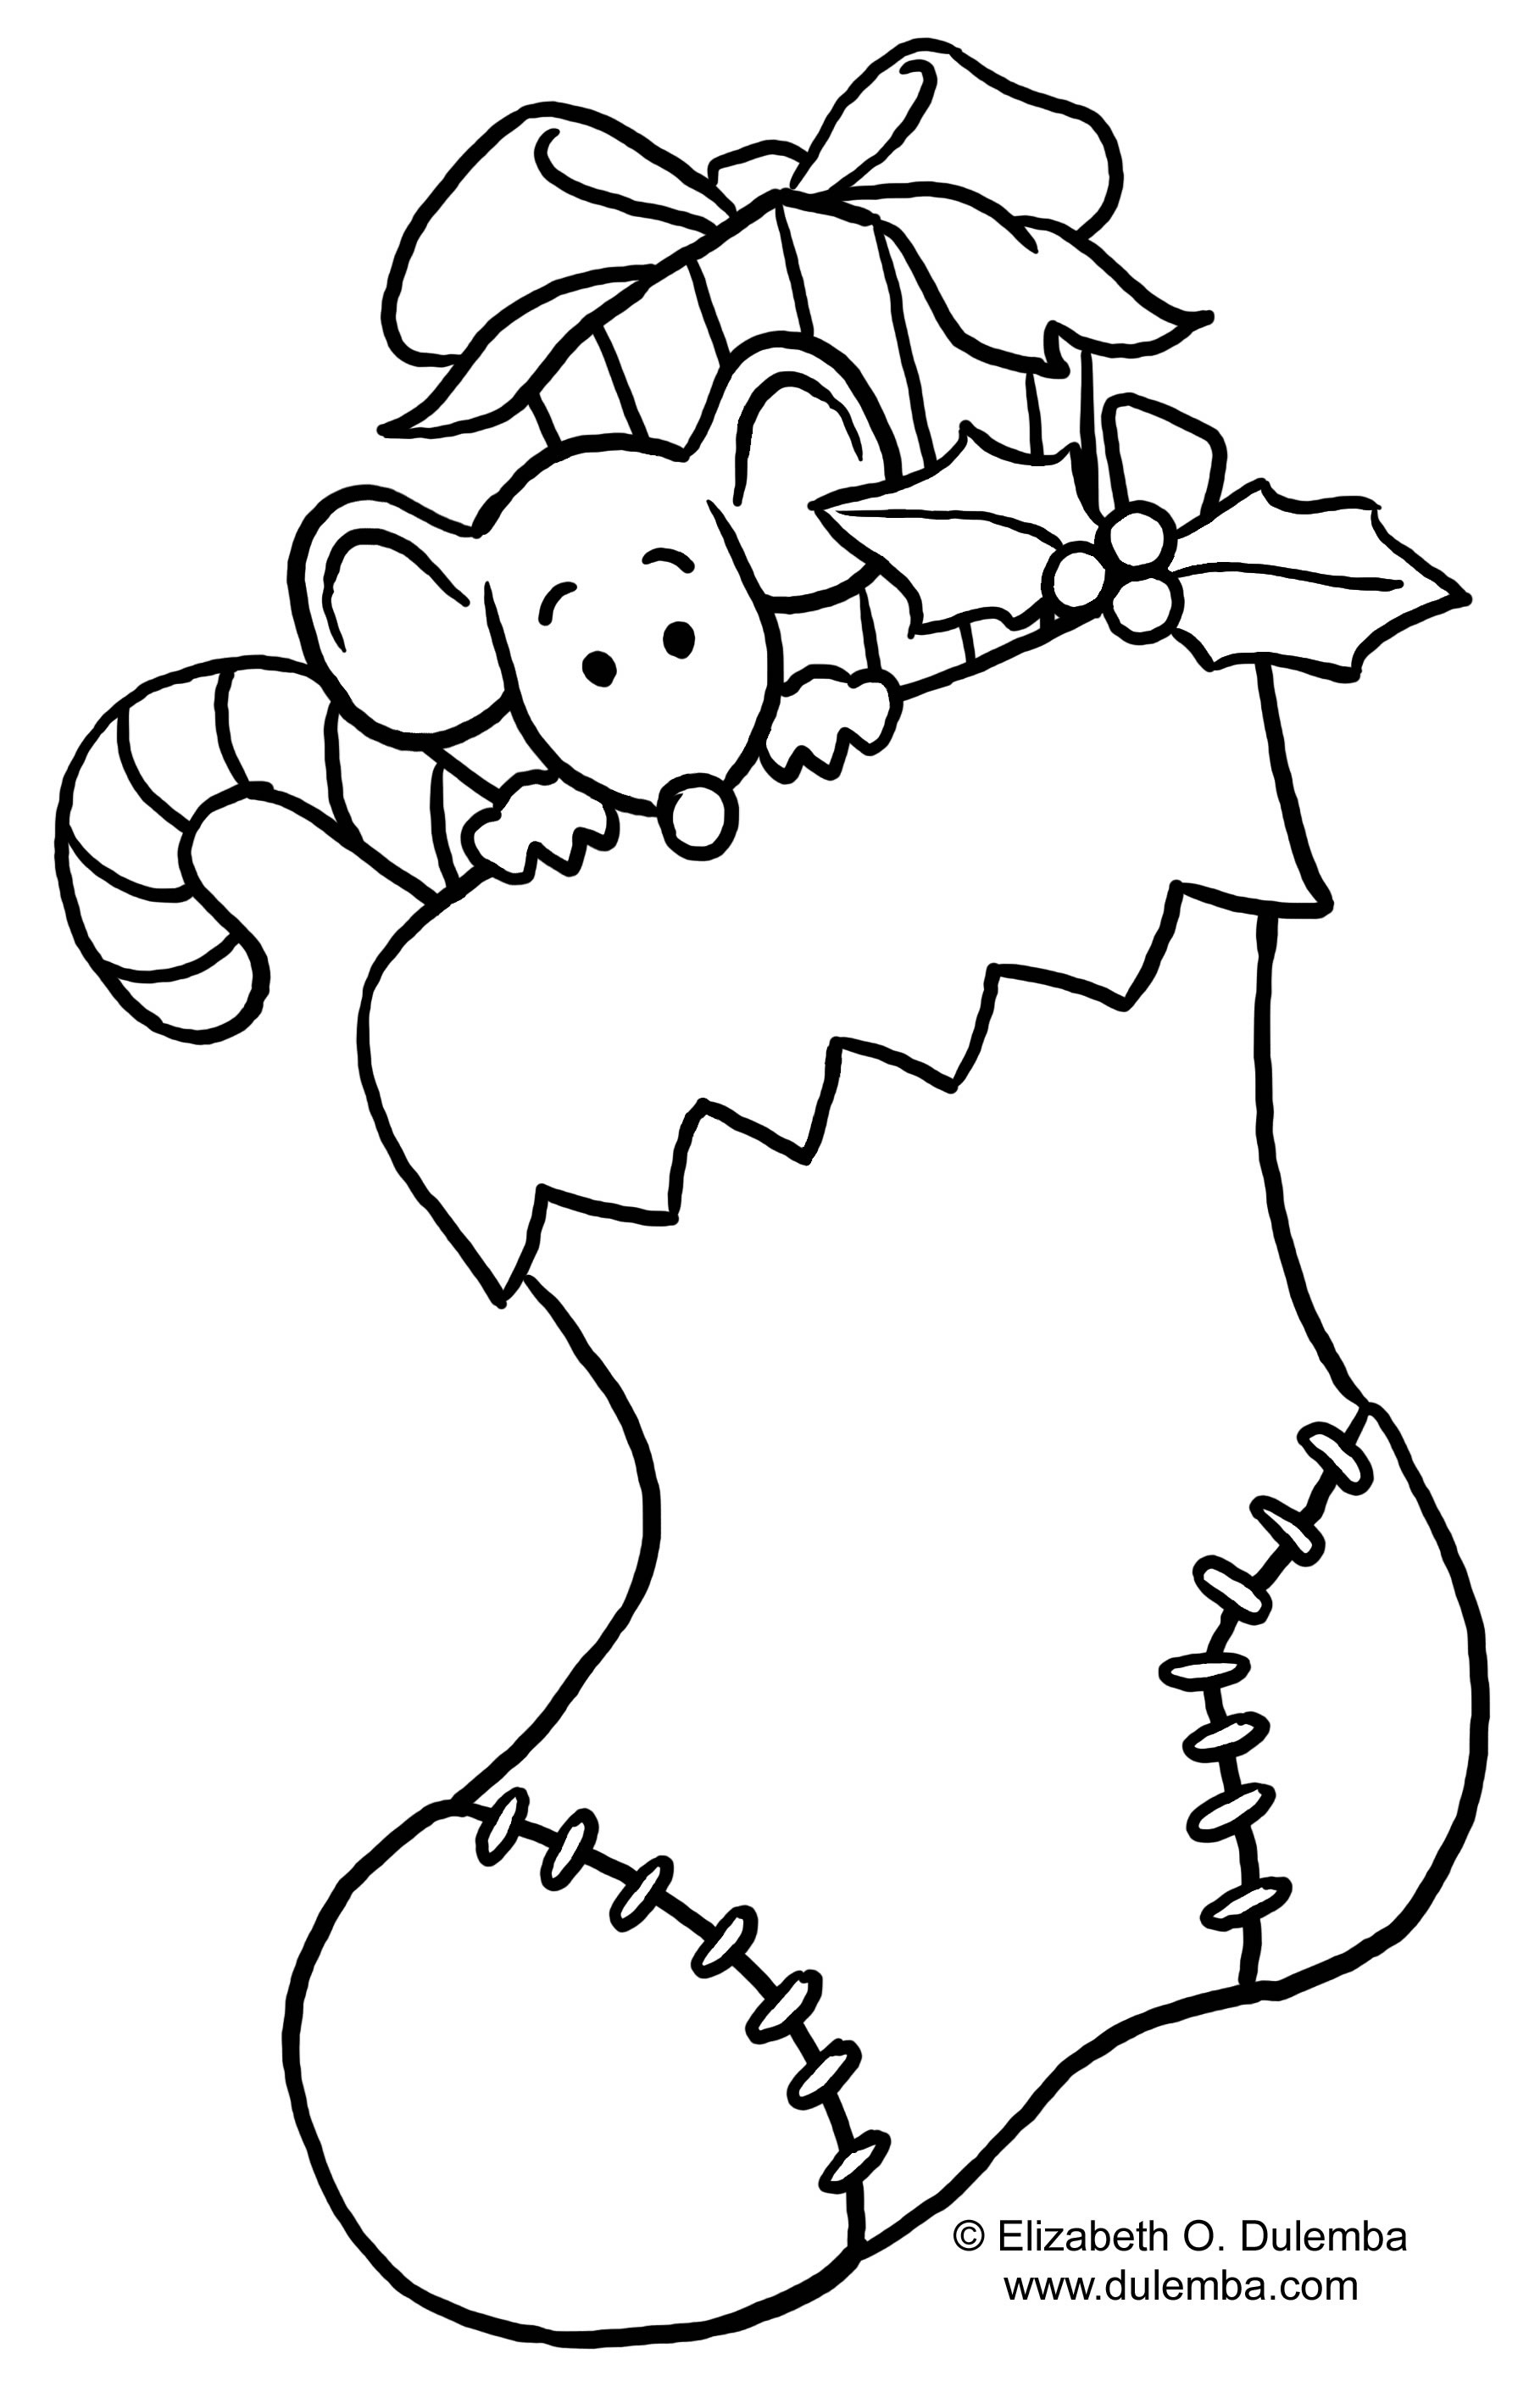 Coloring Pages ~ Coloring Pages Extraordinary Christmas Templates - Free Printable Christmas Cartoon Coloring Pages